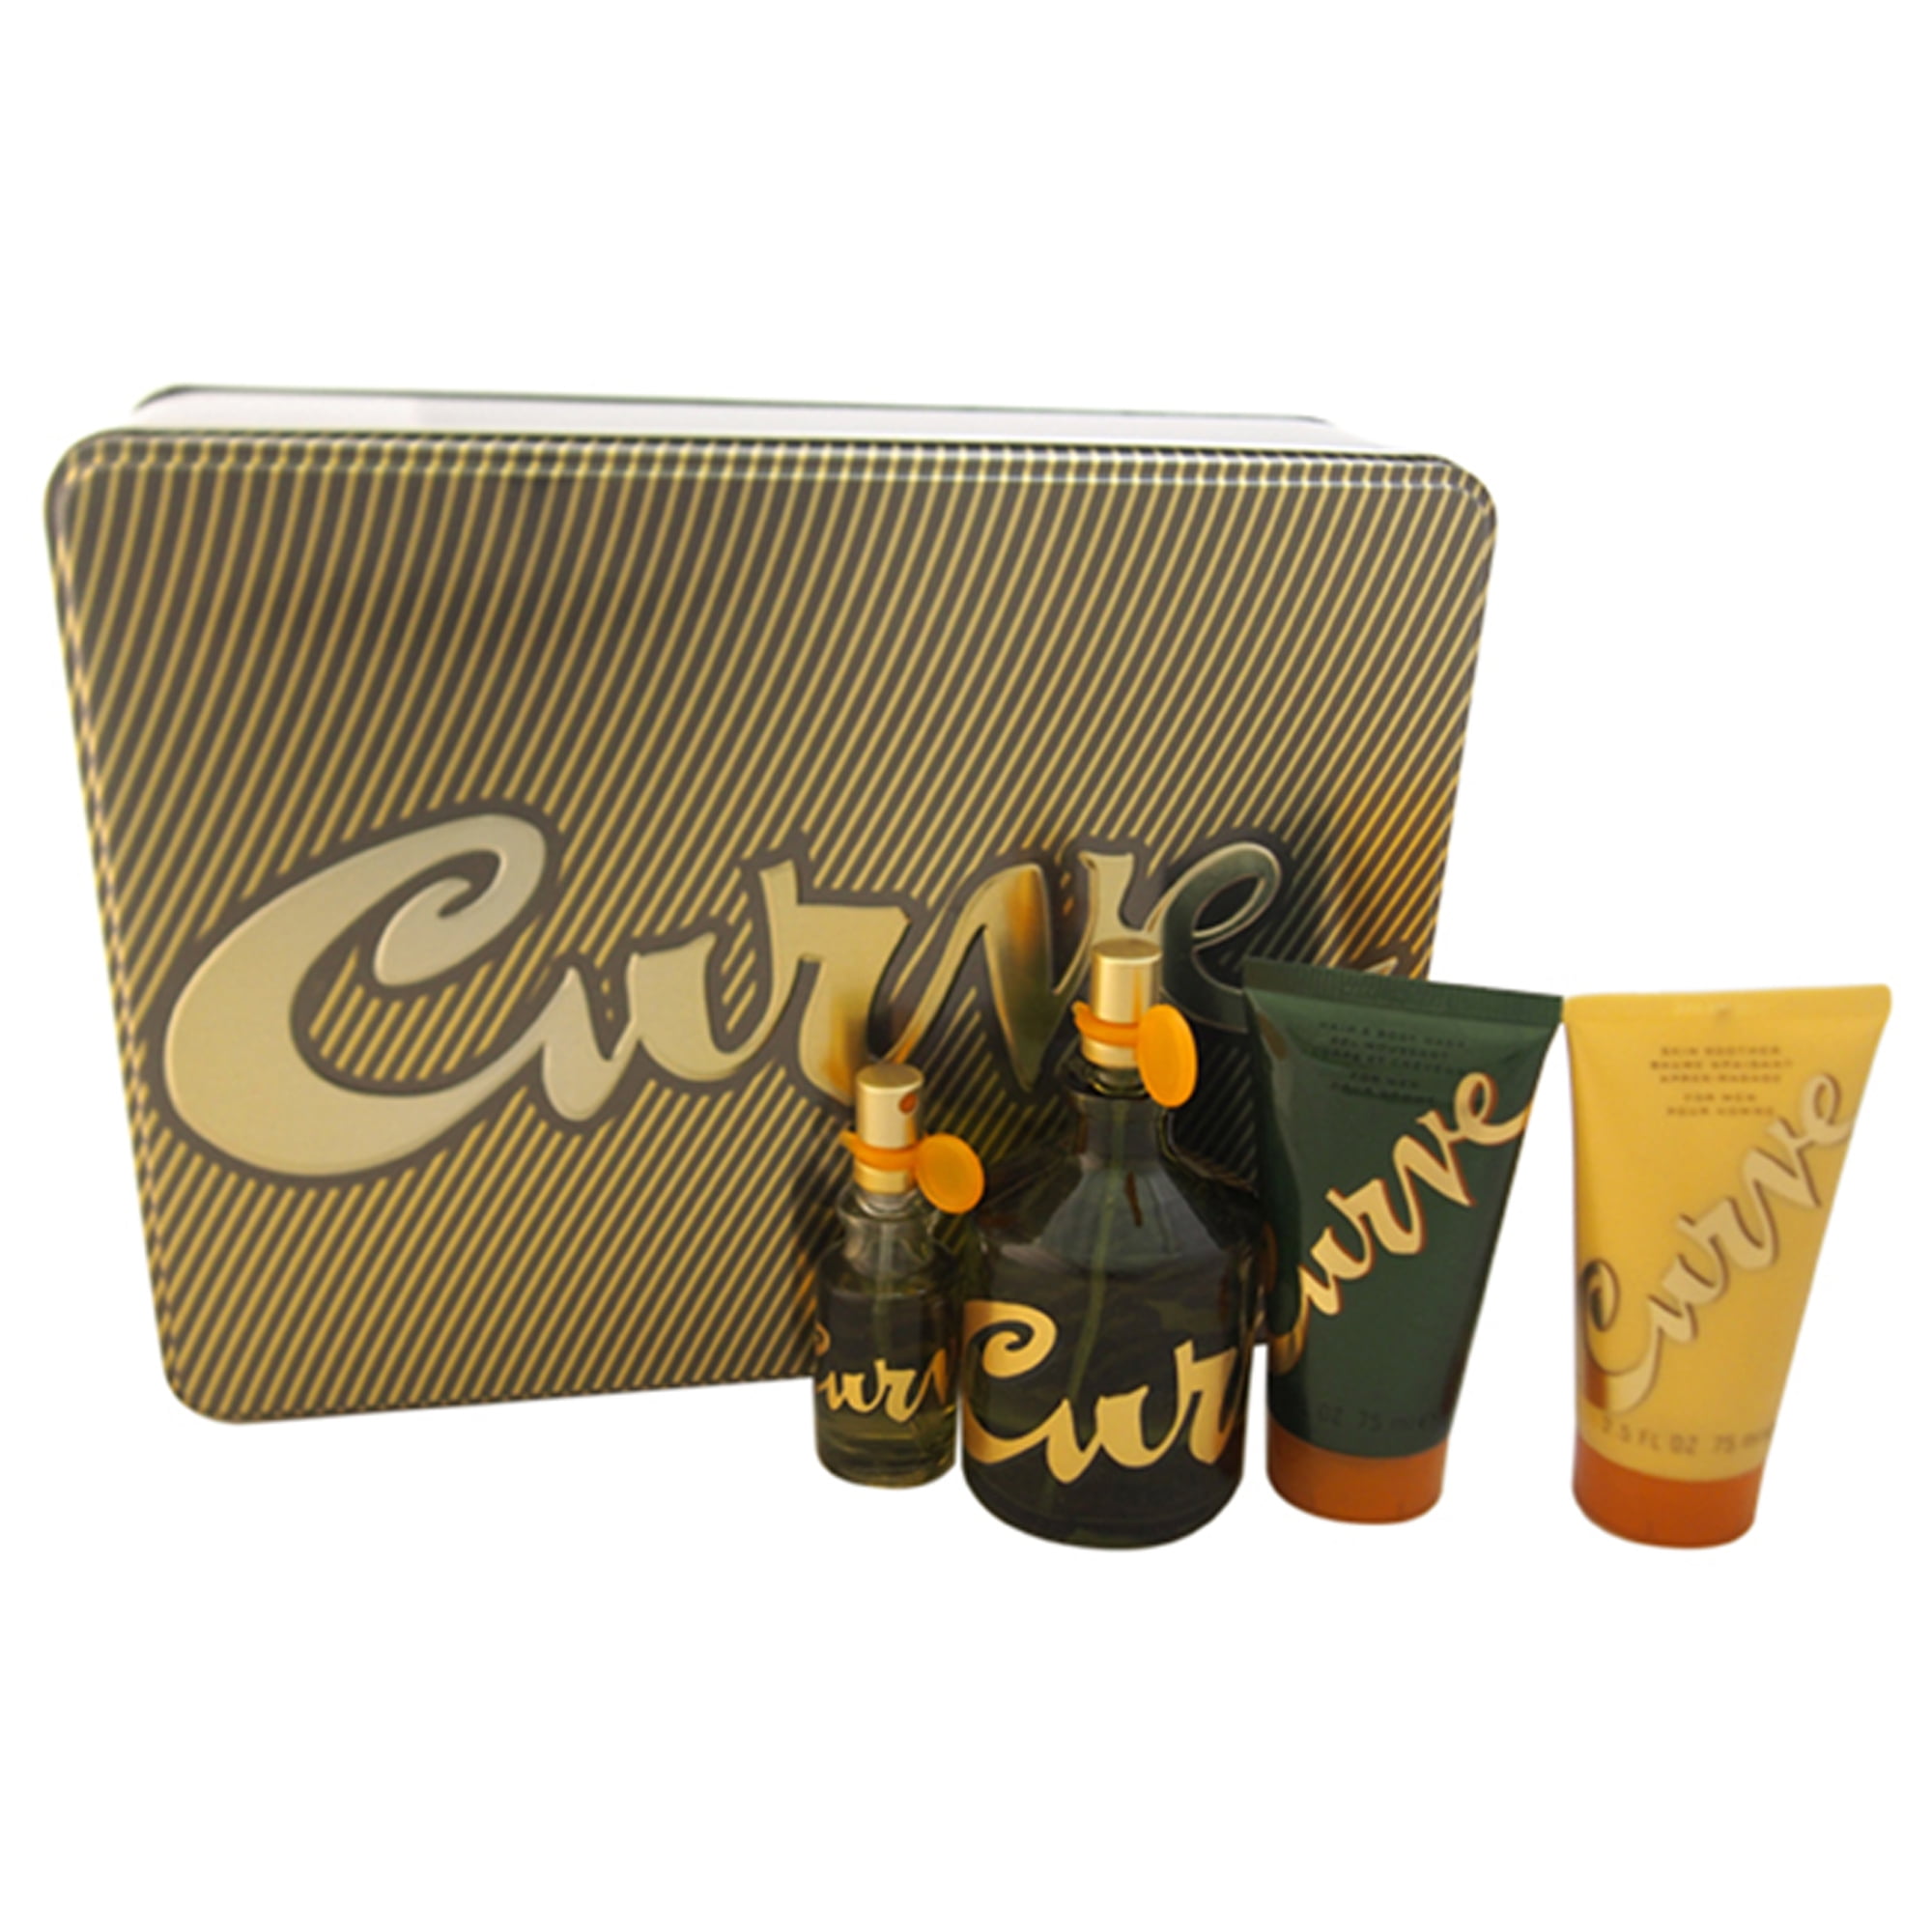 Liz Claiborne Curve , 4 Pc Gift Set 4.2oz Cologne Spray, 15ml Cologne  Travel Spray, 2.5oz Skin Soother, 2.5oz Hair and Body Wash 